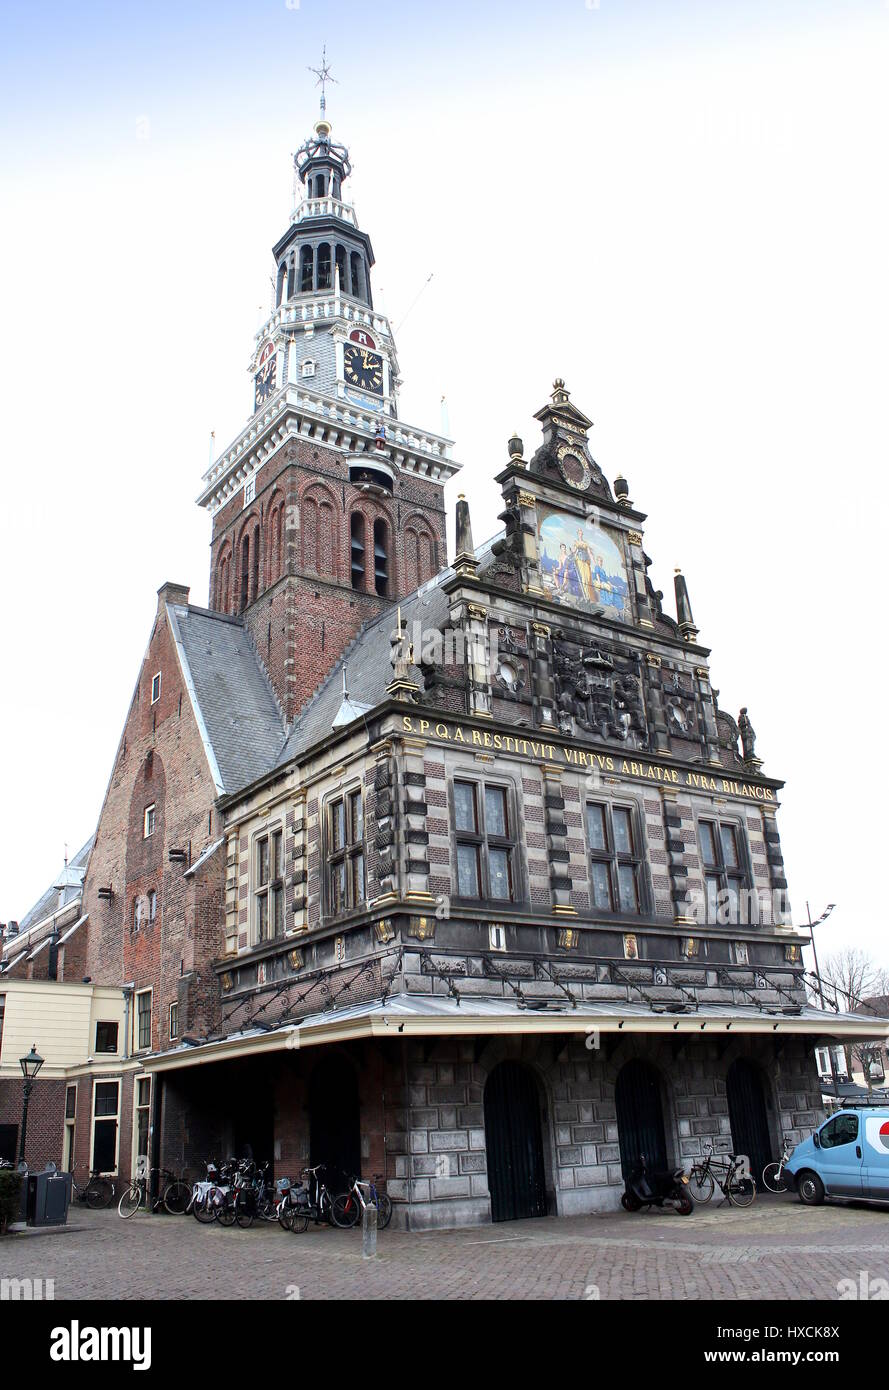 De Waag (Weighing house) at Waagplein square in Alkmaar, The Netherlands. One of the very few remaining weigh houses still in use. Stock Photo